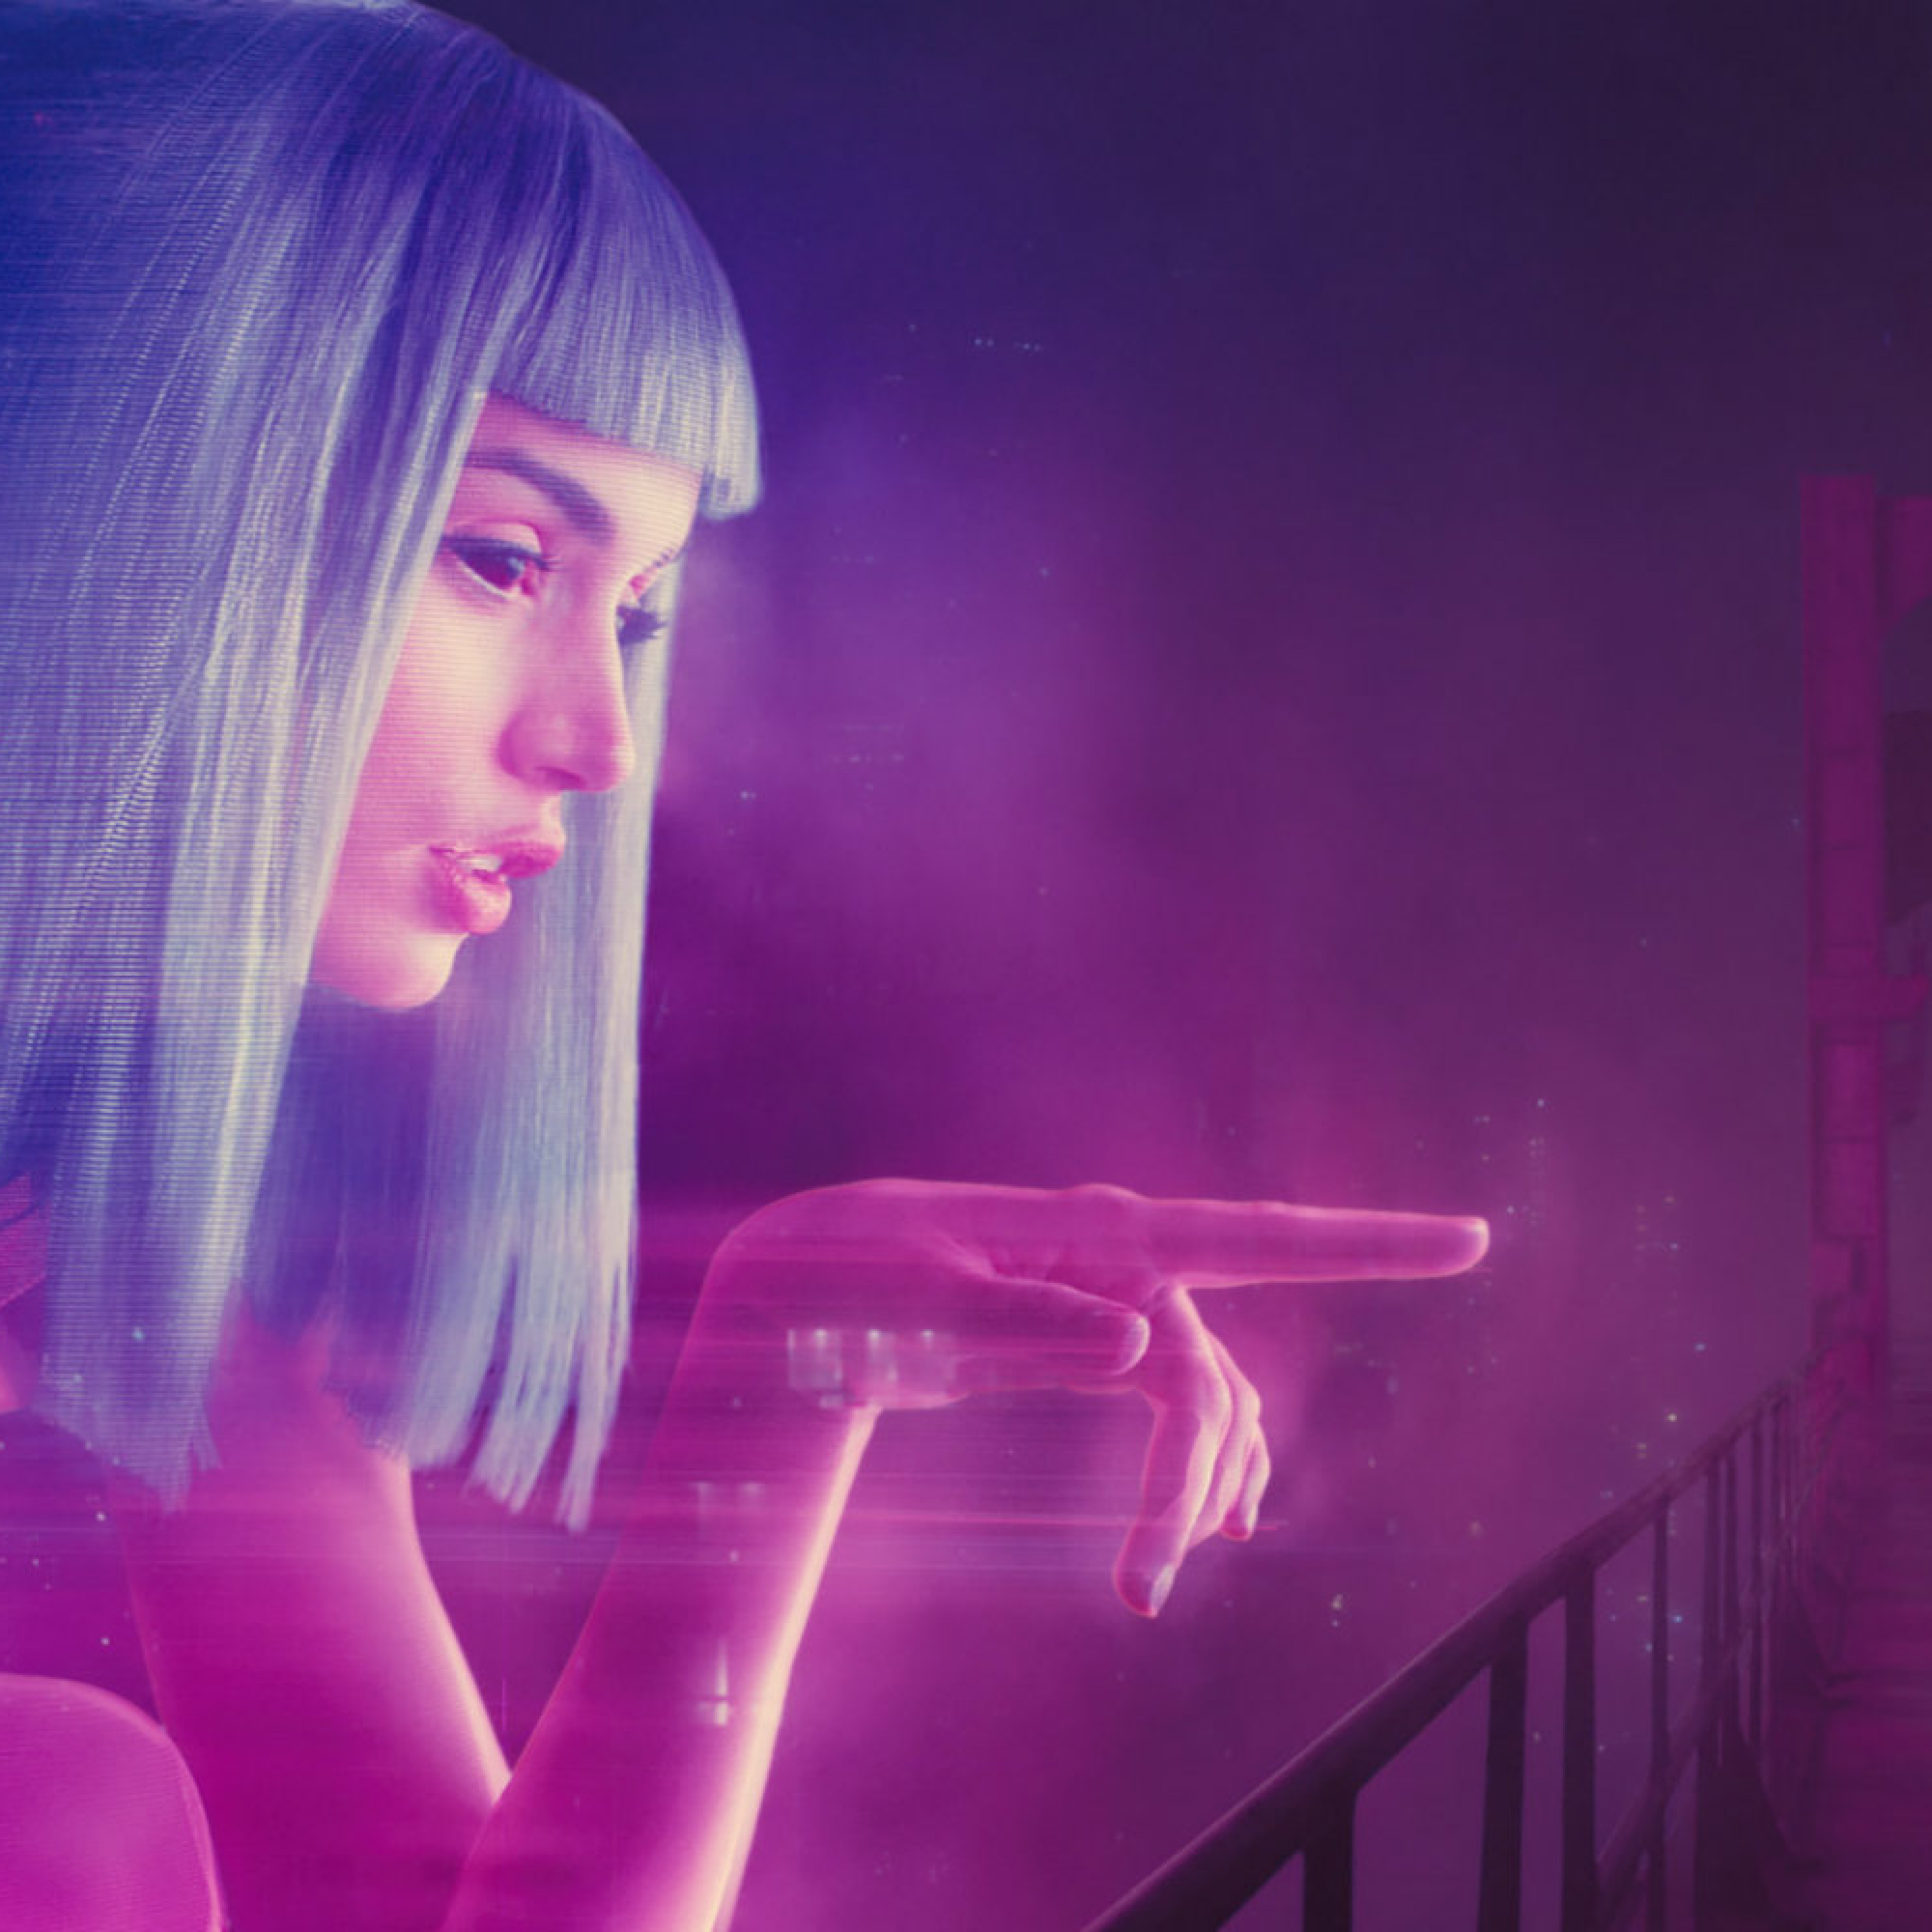 2932x2932 blade runner 2049 movie joi and k ipad pro retina display wallpaper hd movies 4k wallpapers images photos and background